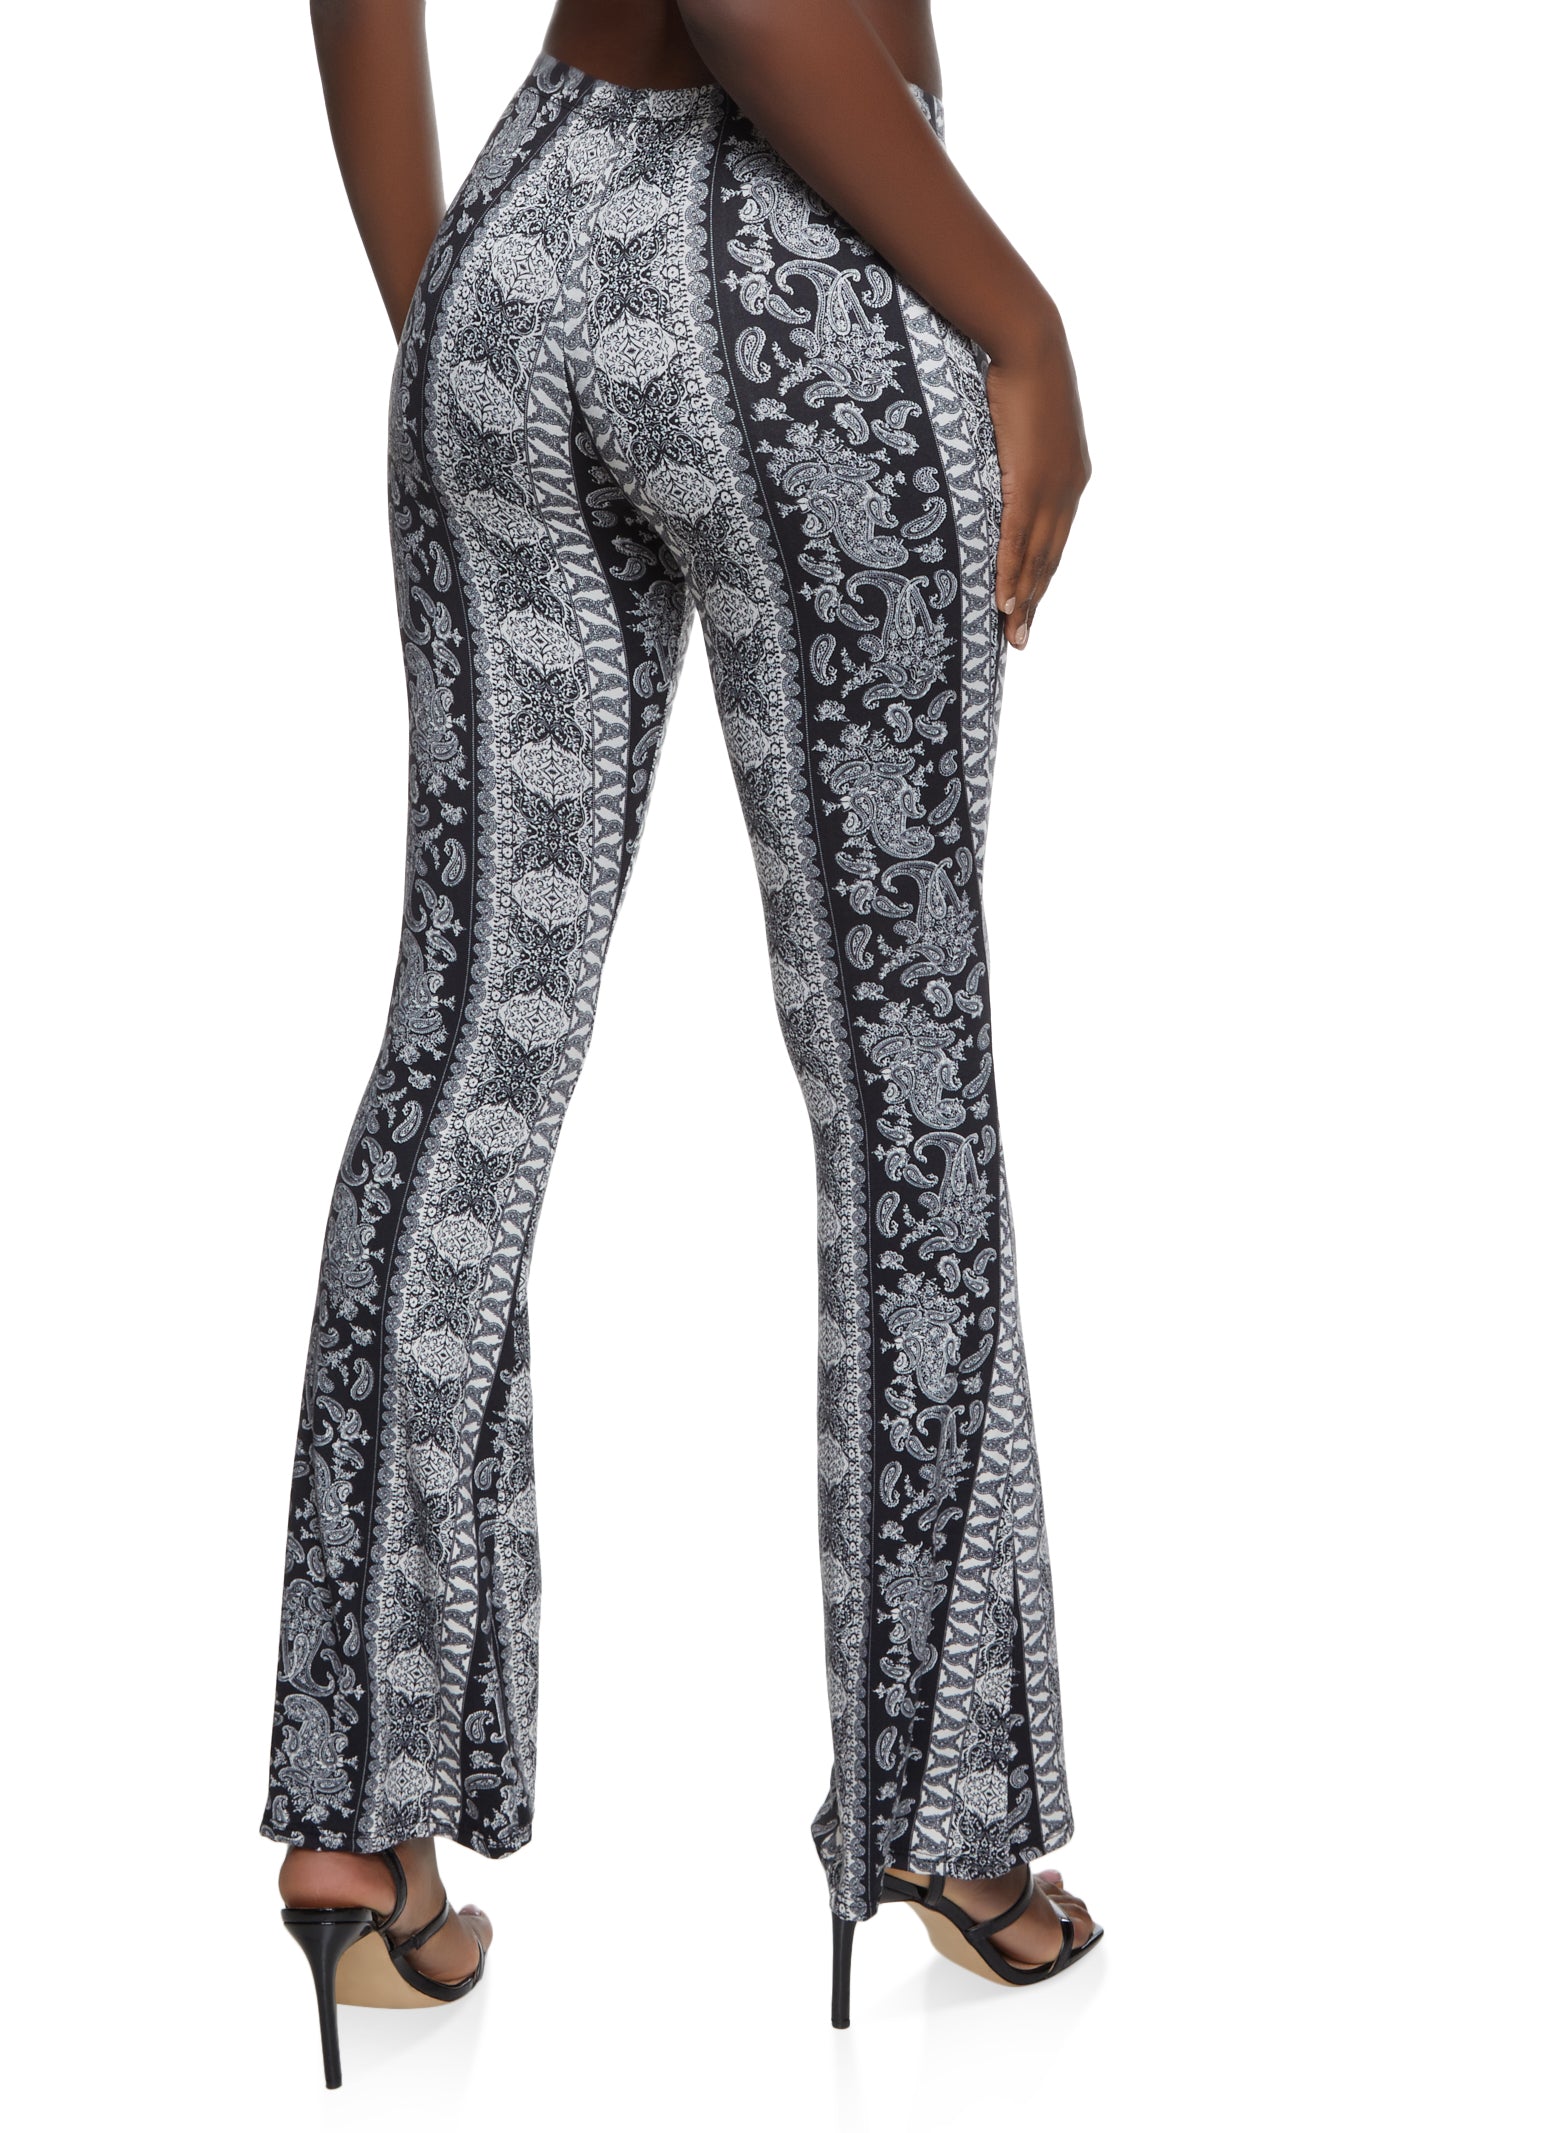 Shop Flared pants in Daisy Print from JAAF at Seezona | Seezona